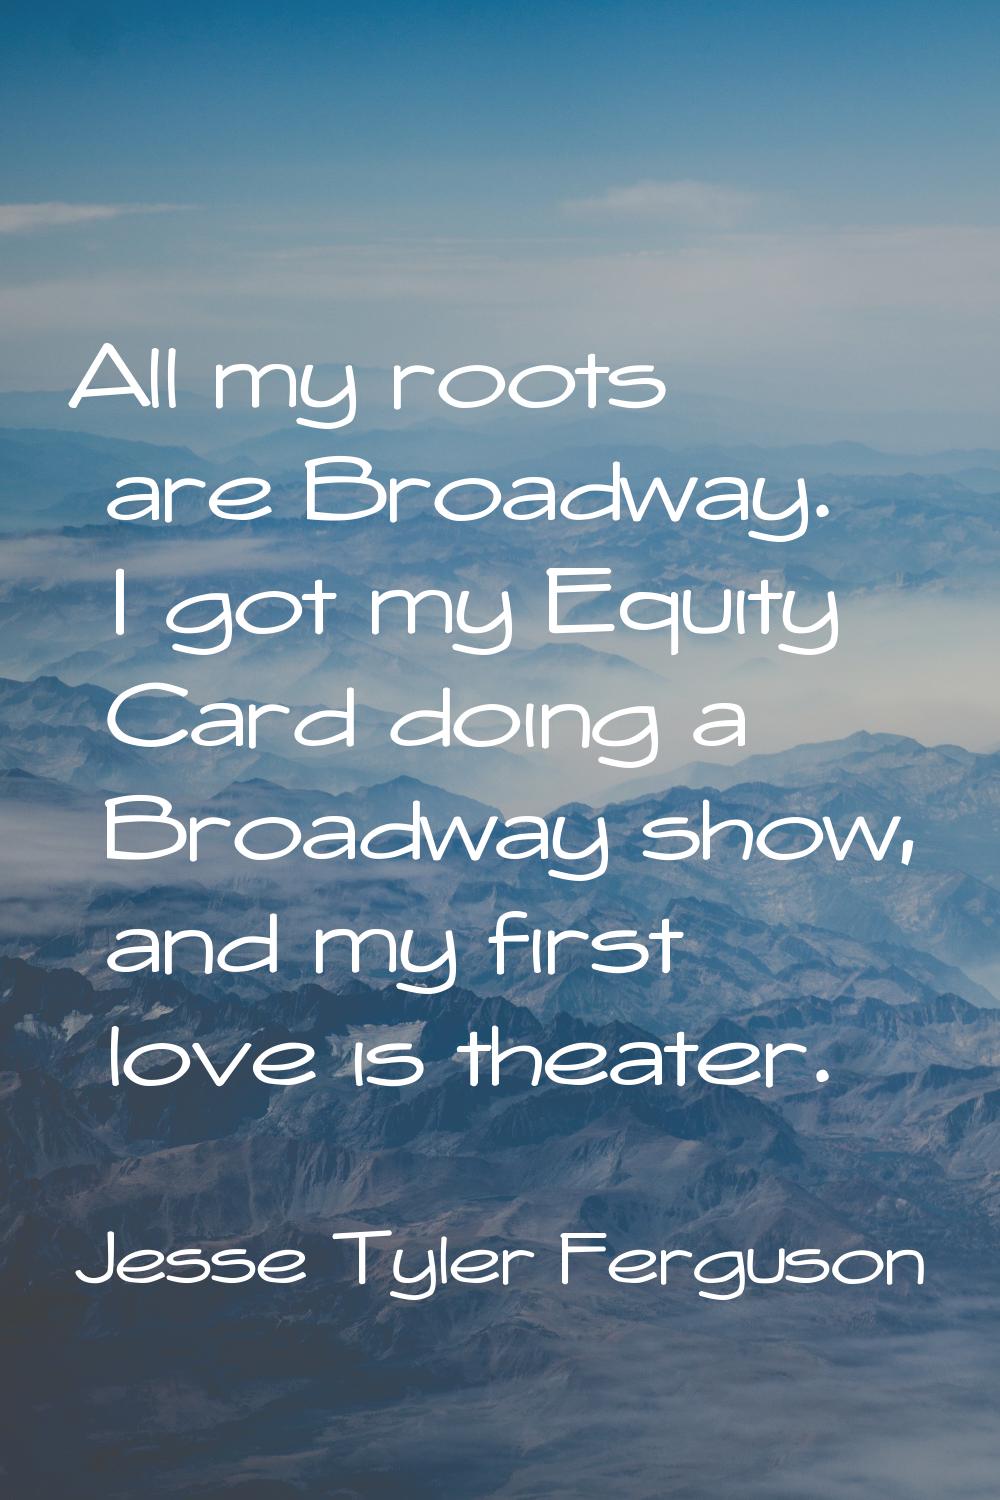 All my roots are Broadway. I got my Equity Card doing a Broadway show, and my first love is theater